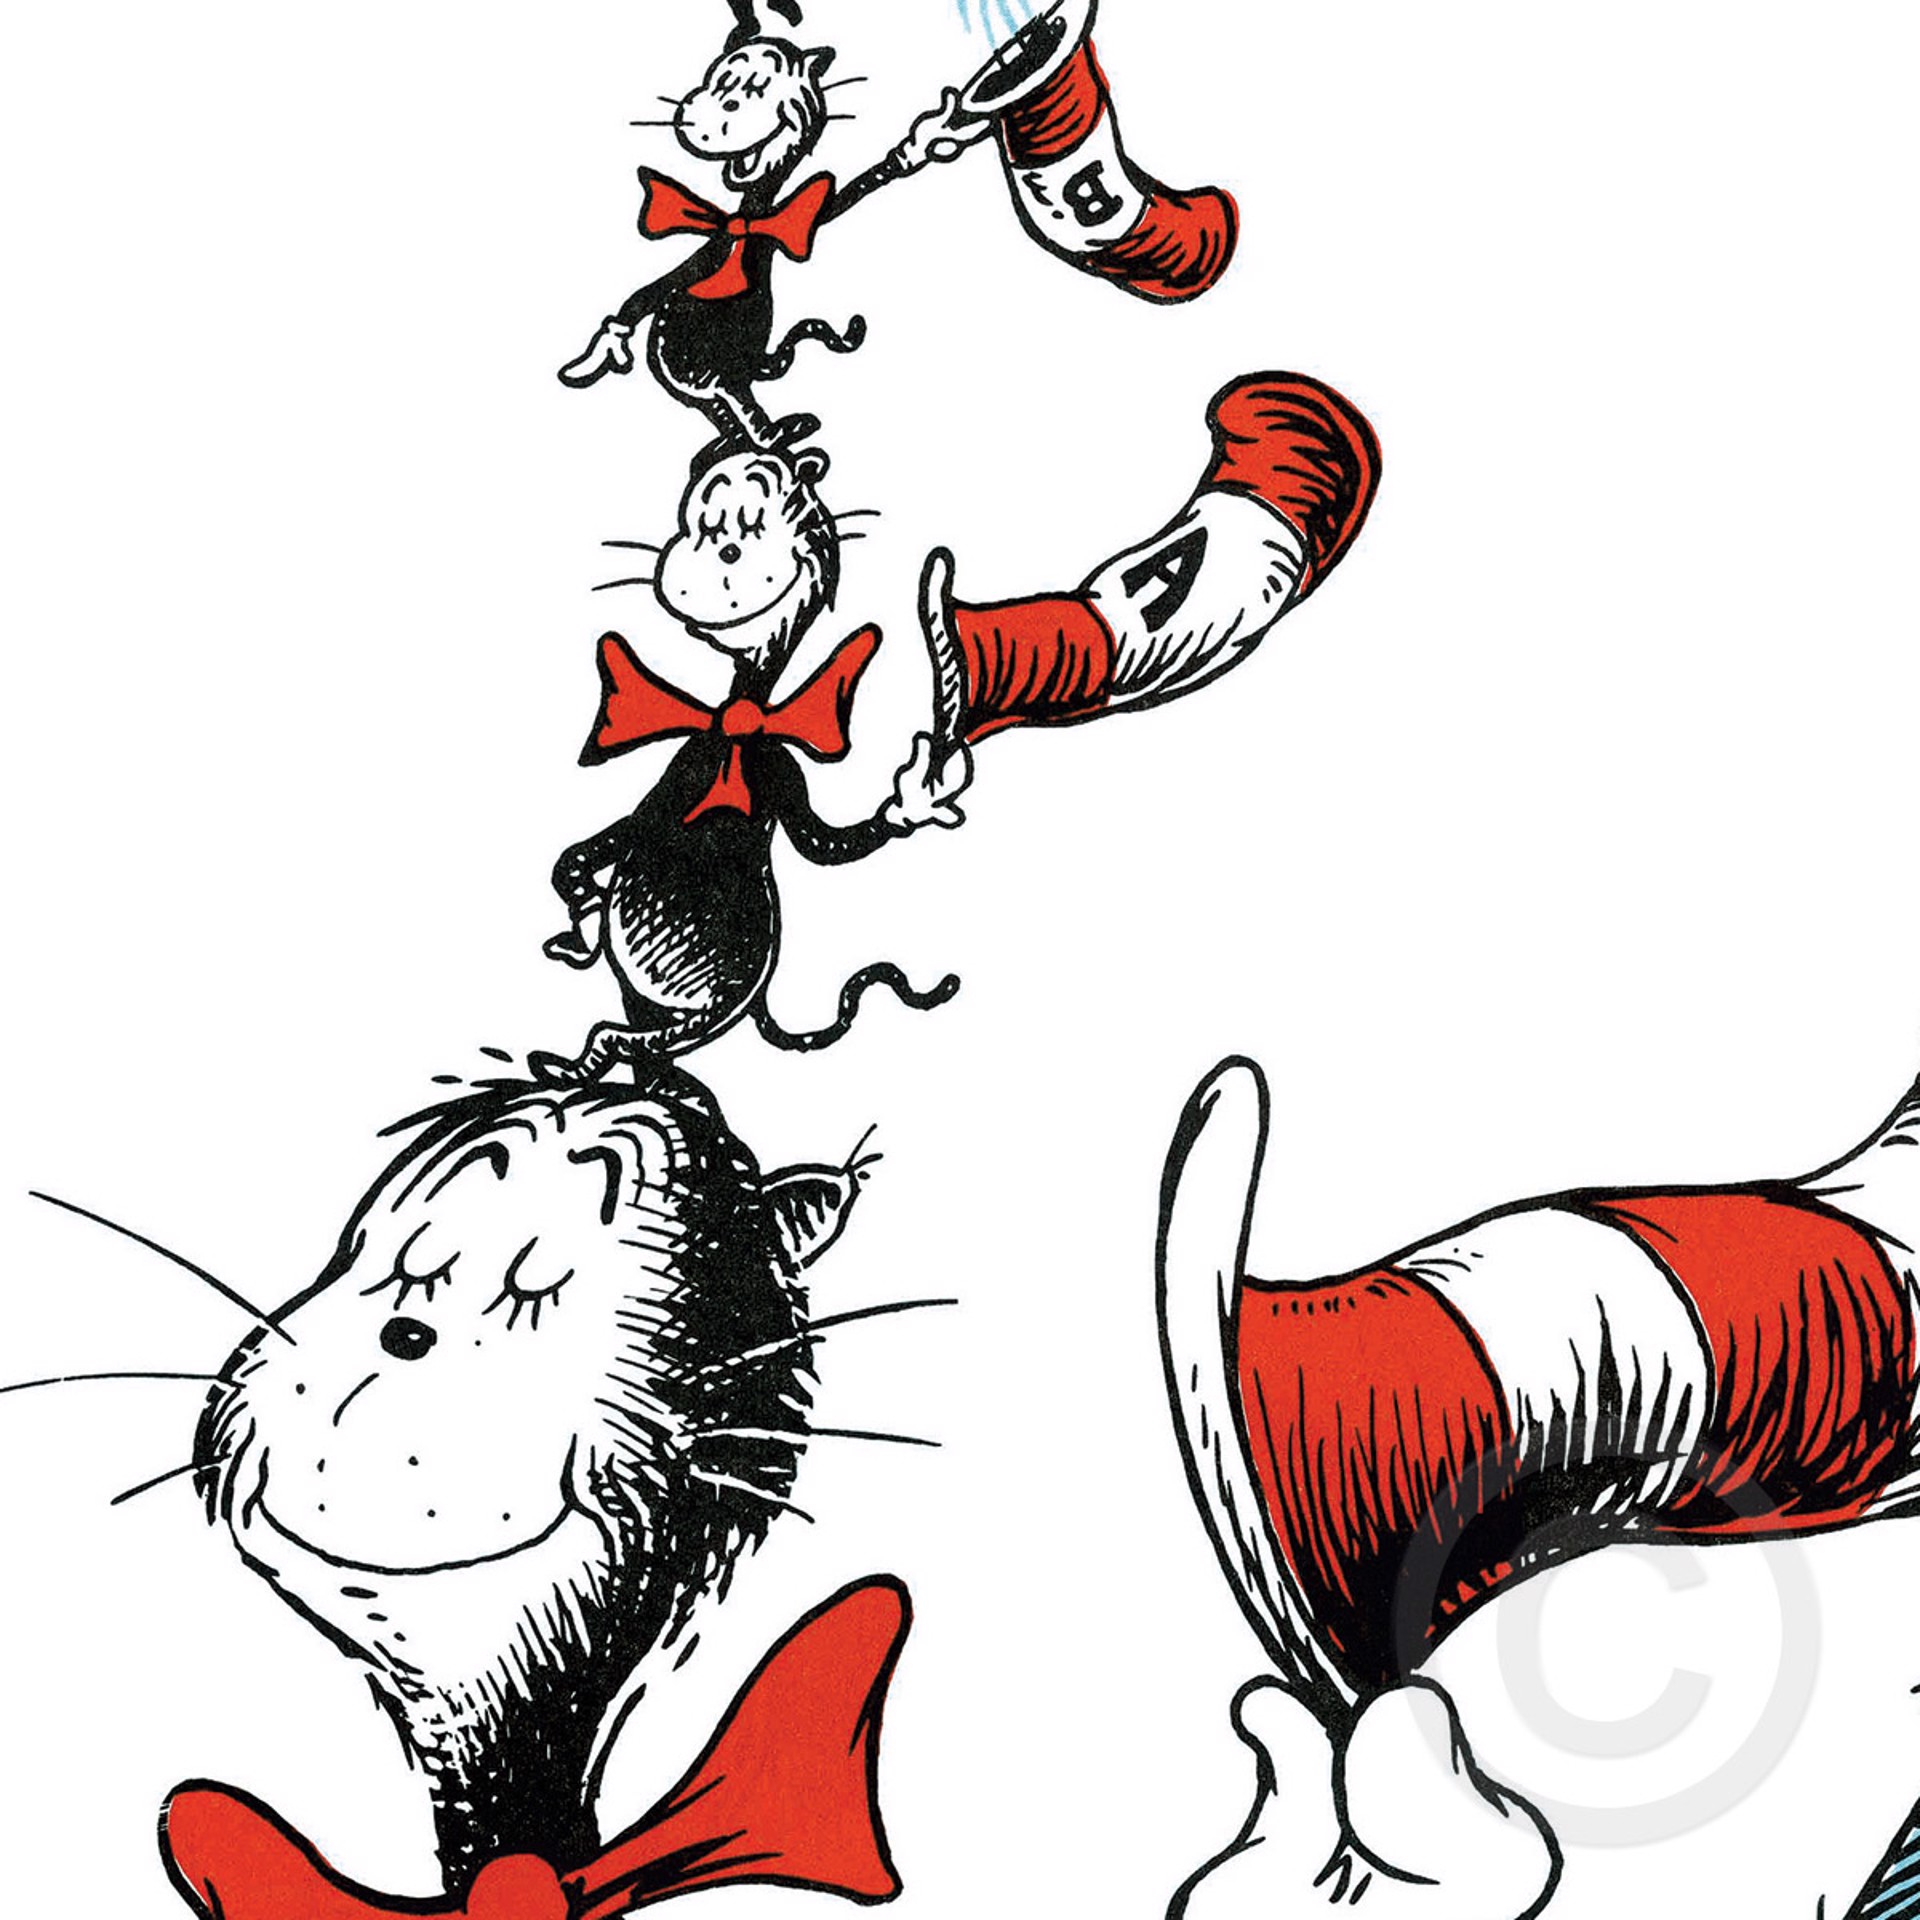 Little Cats B, C And A! by Dr. Seuss